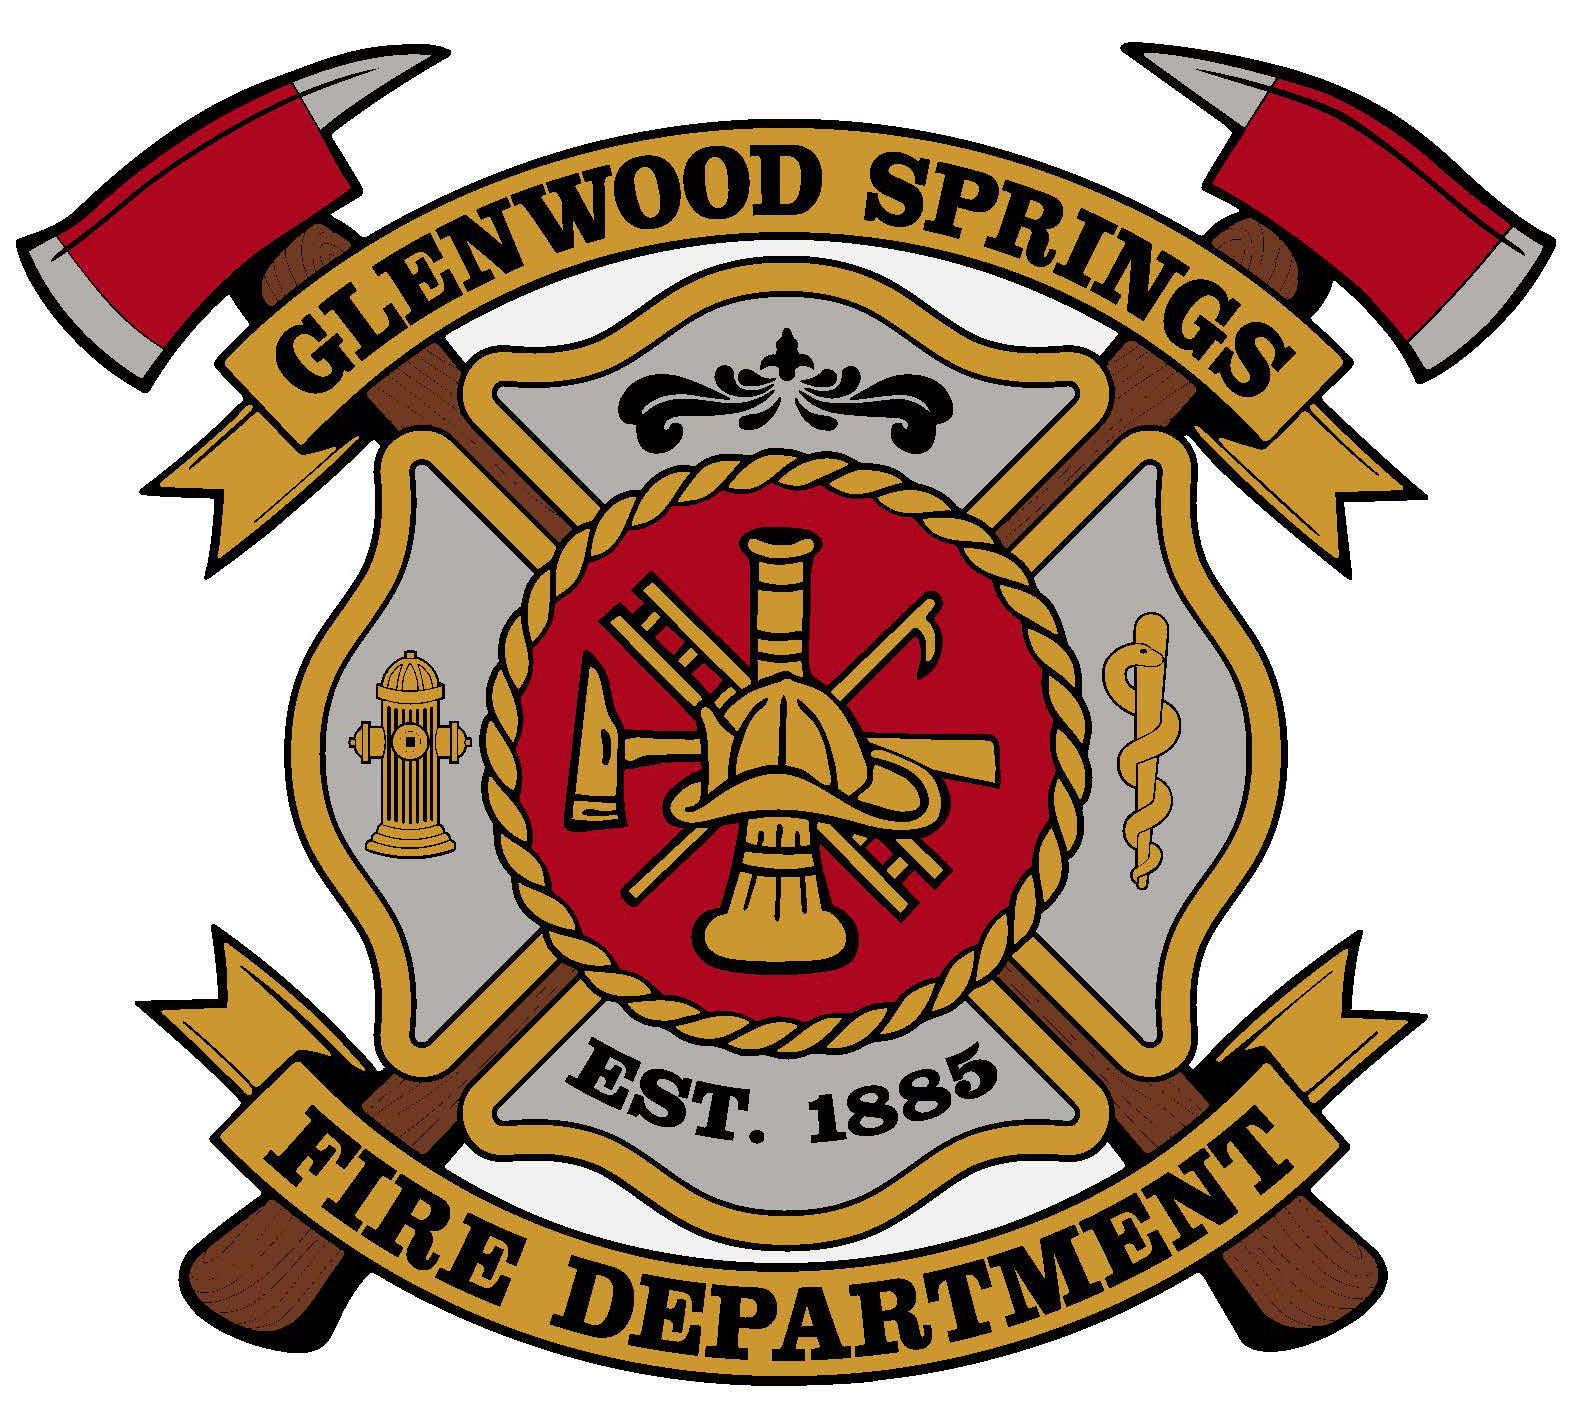 image of the Glenwood Springs Fire Department logo